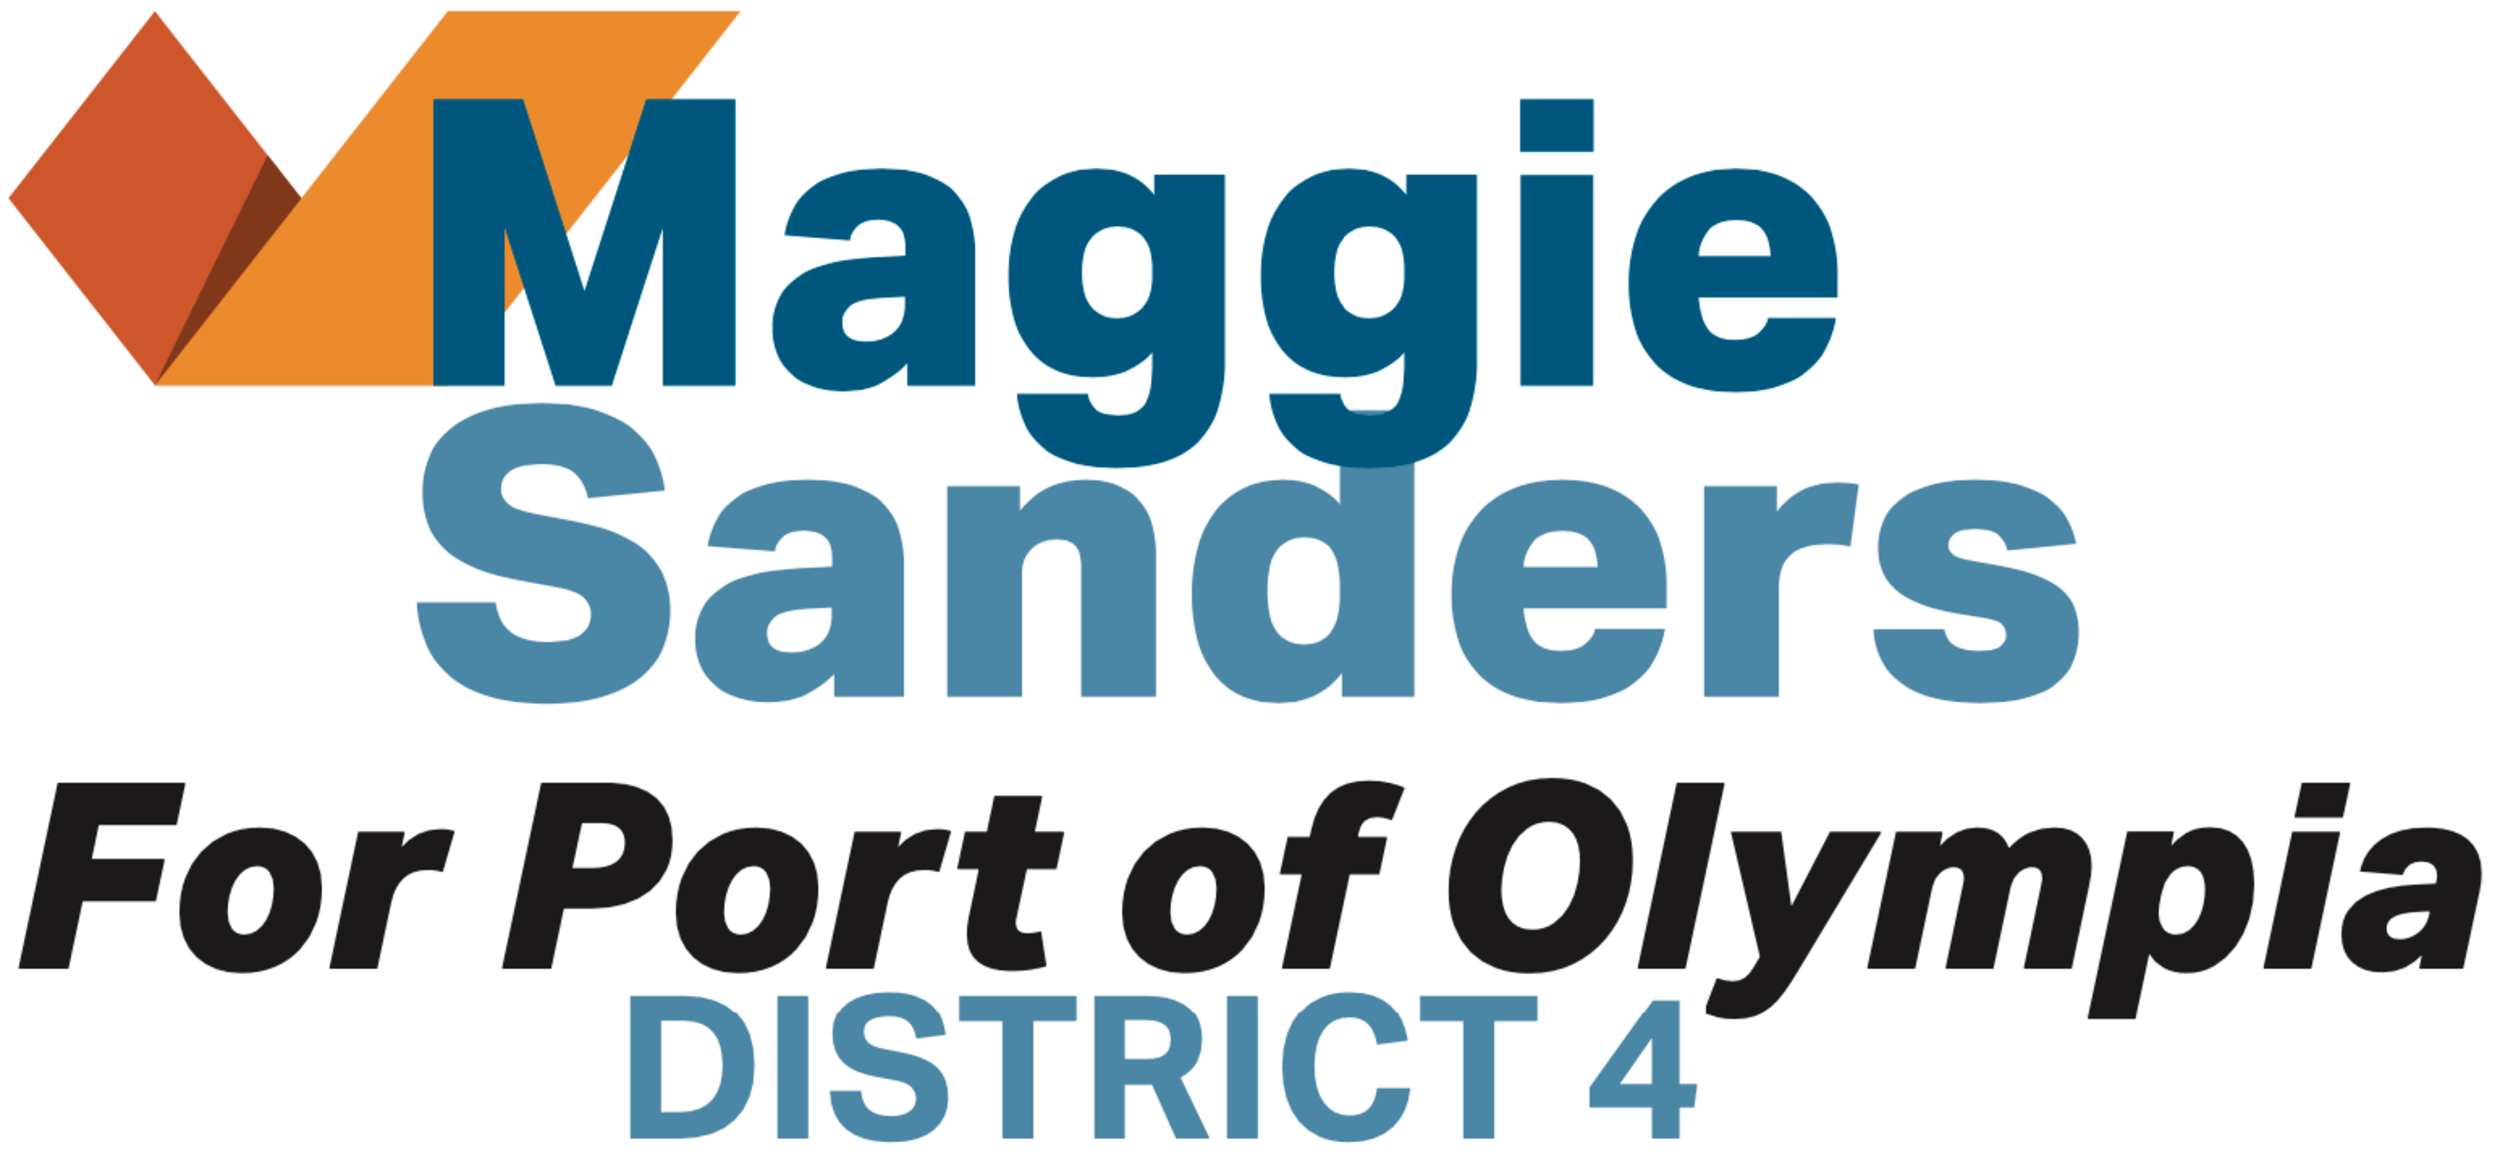 Maggie Sanders for Port of Olympia District 4